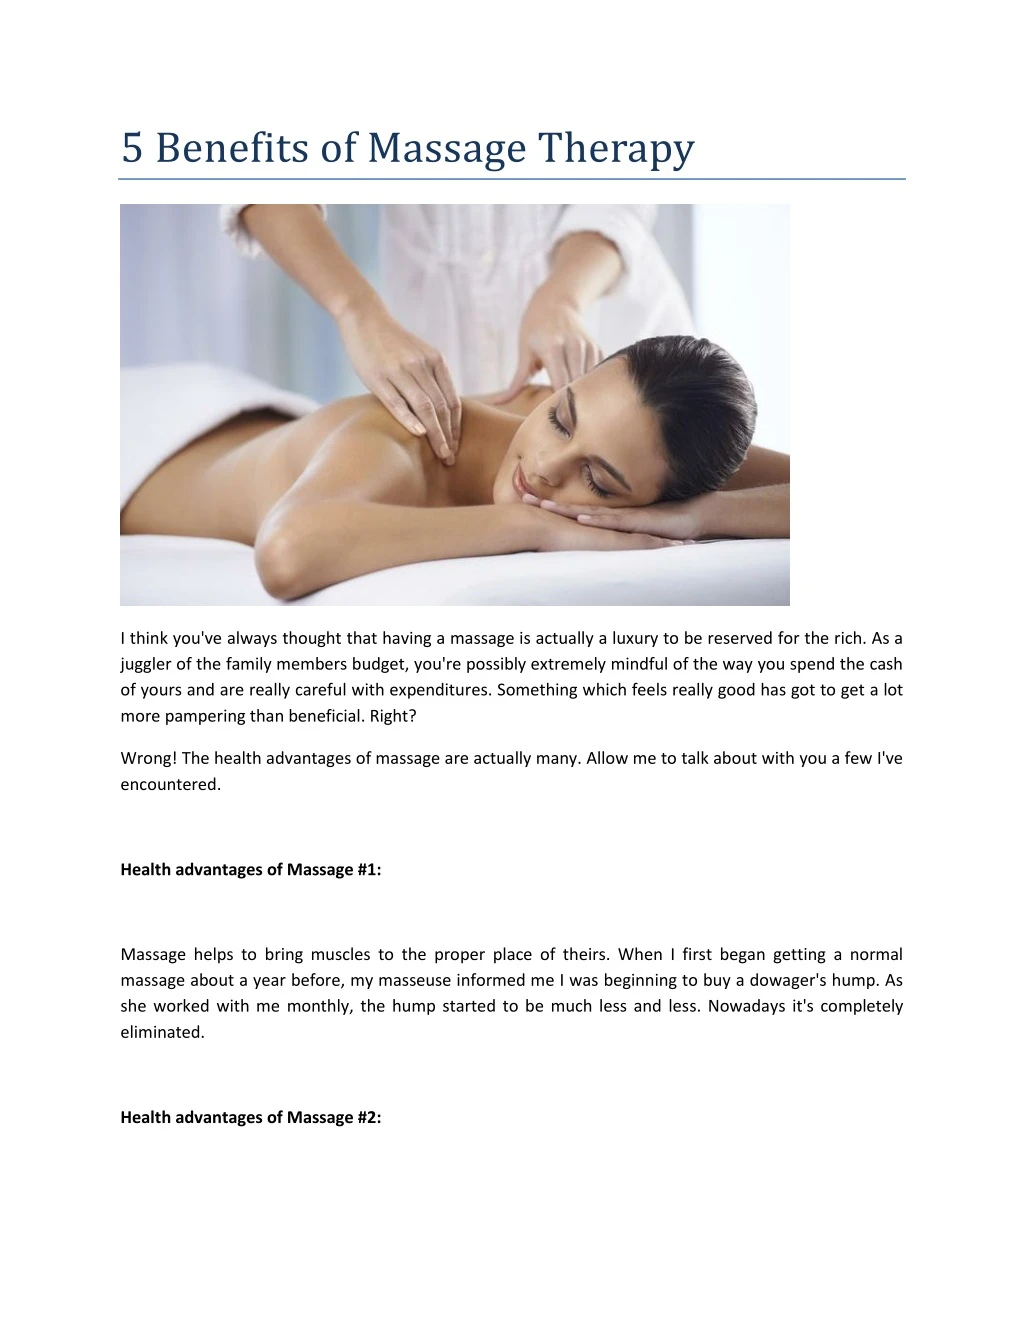 5 benefits of massage therapy